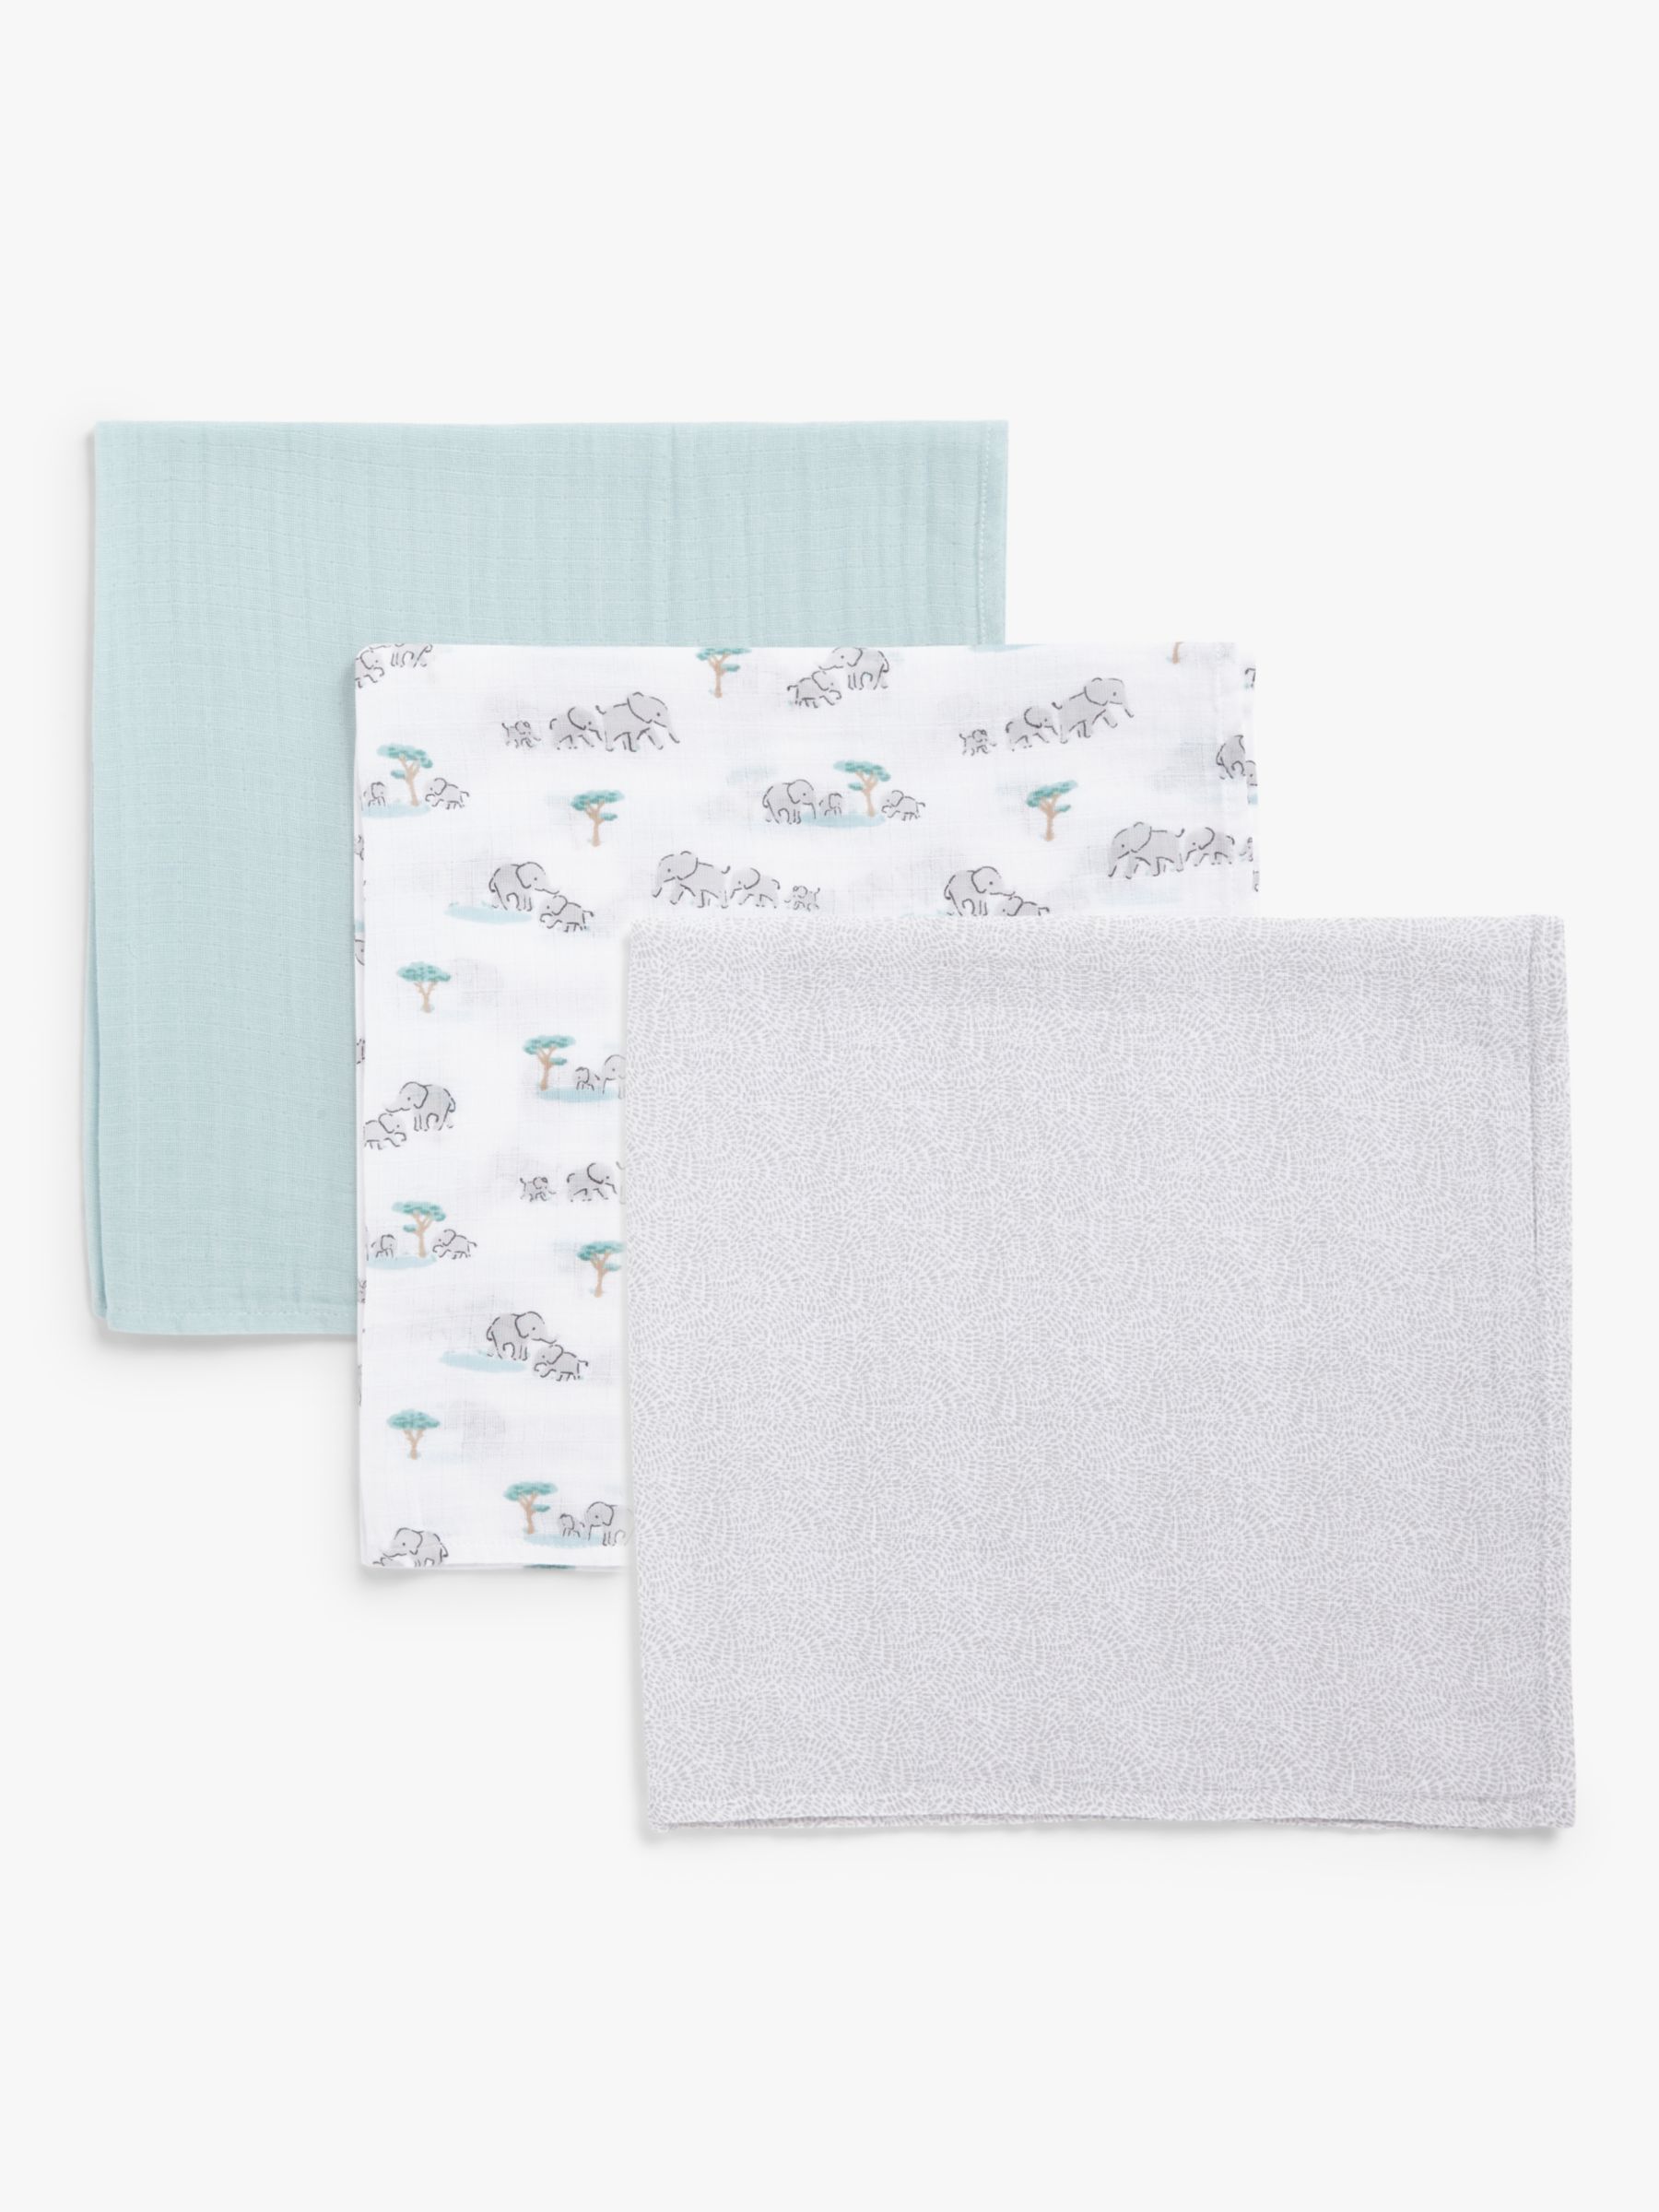 Image of John Lewis and Partners Baby Savanna Muslin Cloths Pack of 3 Multi